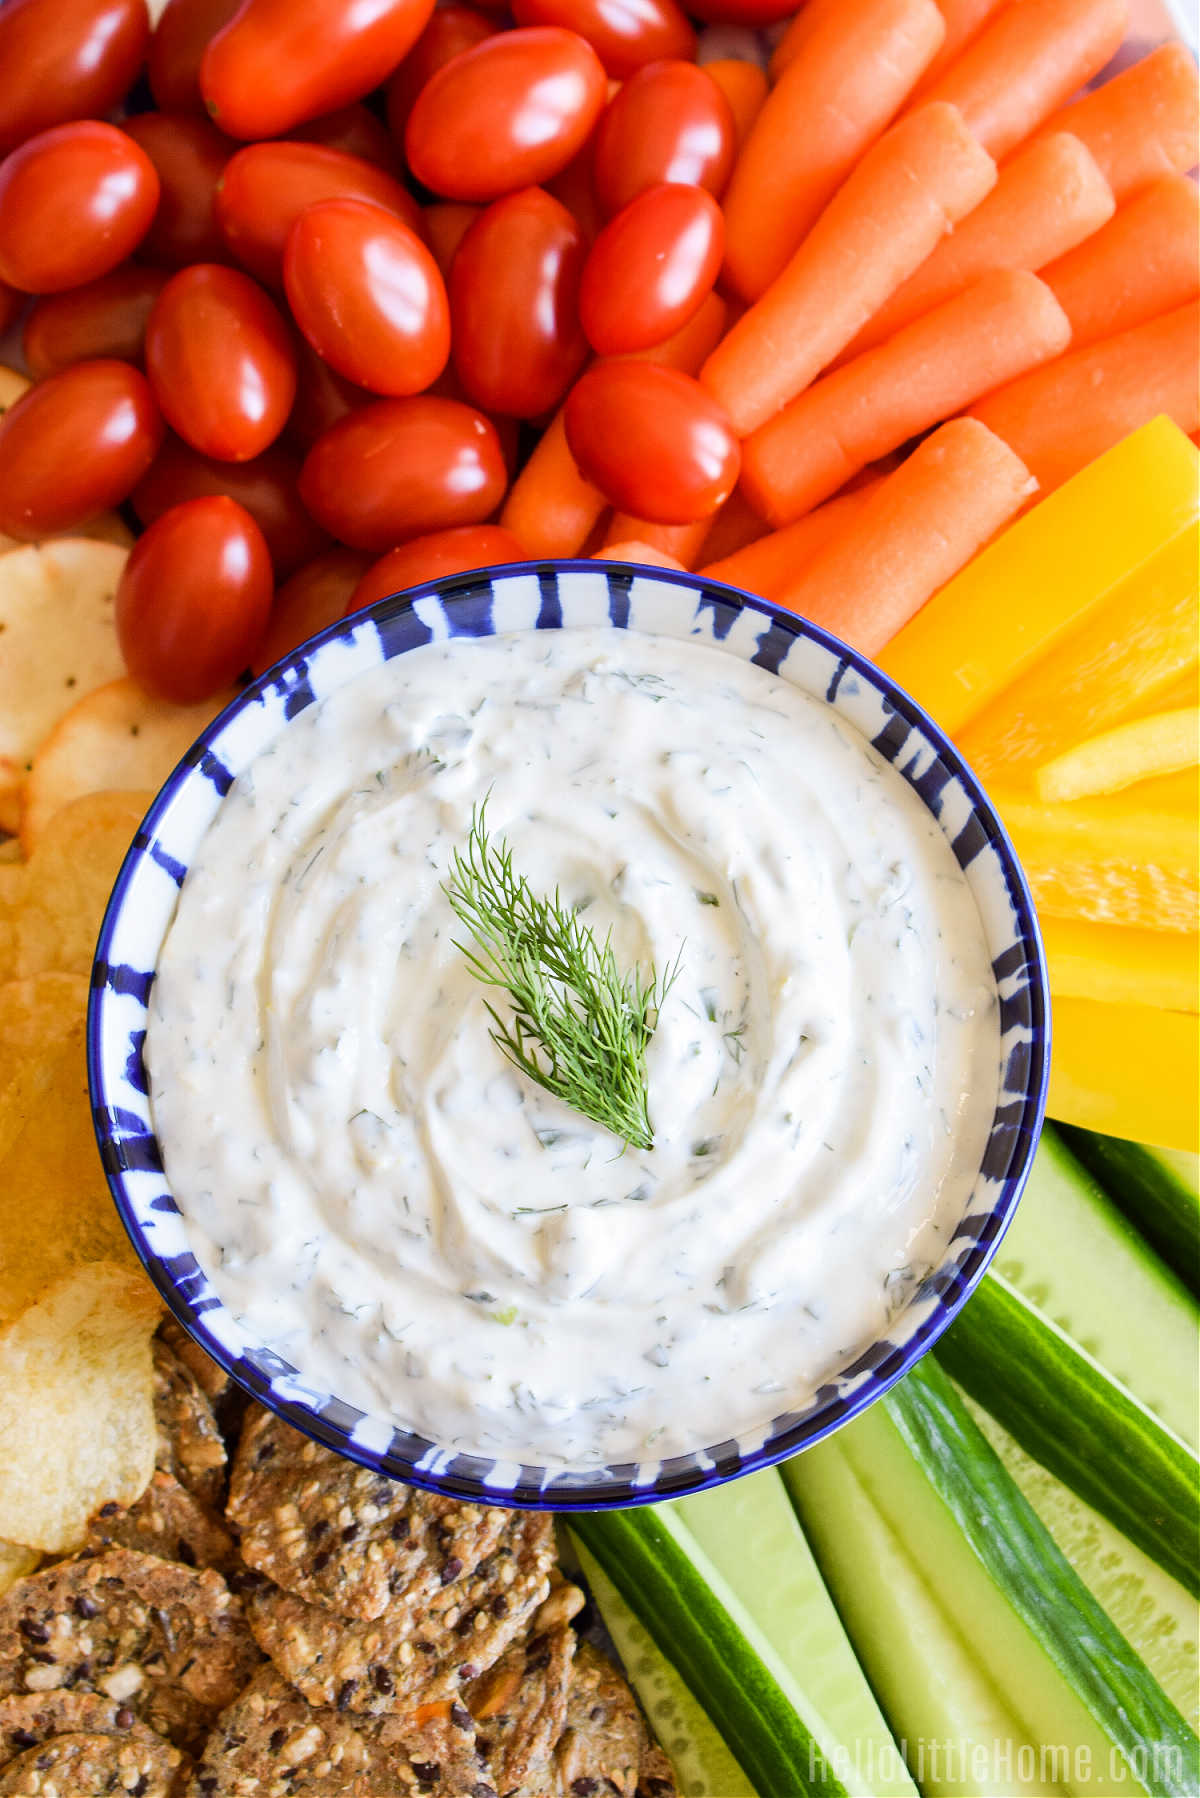 A bowl of dip served with crackers, veggies, and chips.